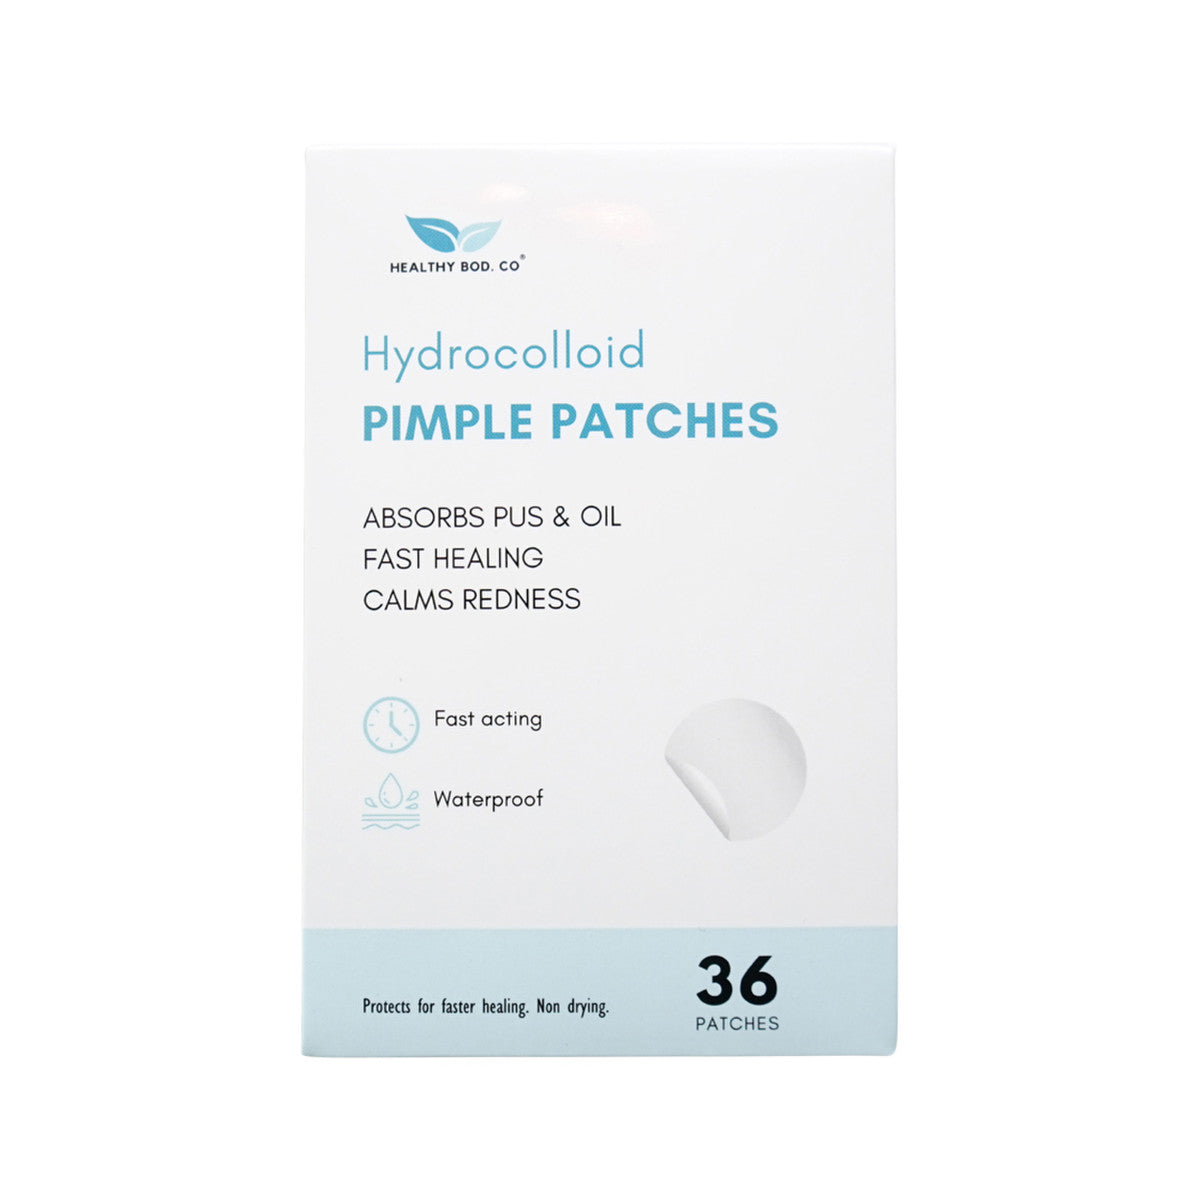 Healthy Bod. Co Hydrocolloid Pimple Patches x 36 Patches, Bye Bye Blemishes